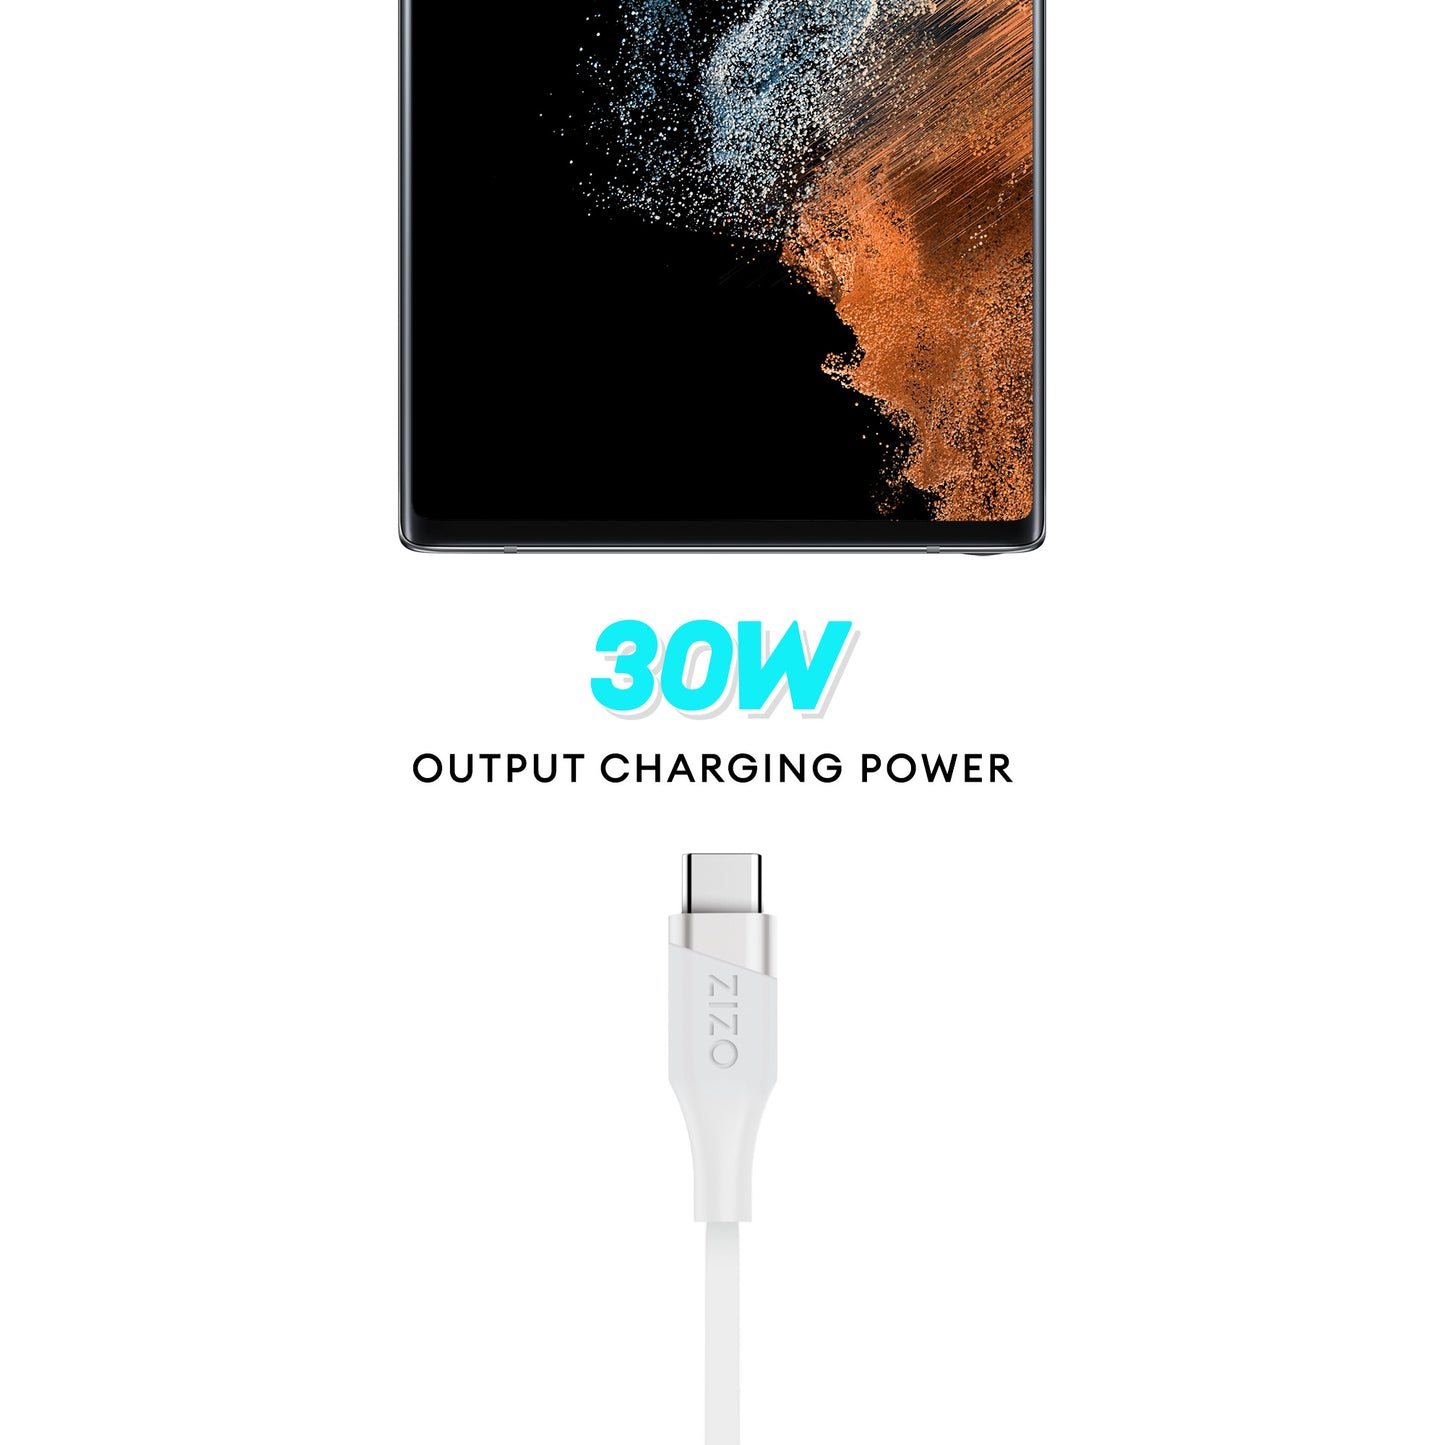 ZIZO PowerVault Cable USB-C to USB-C 6FT